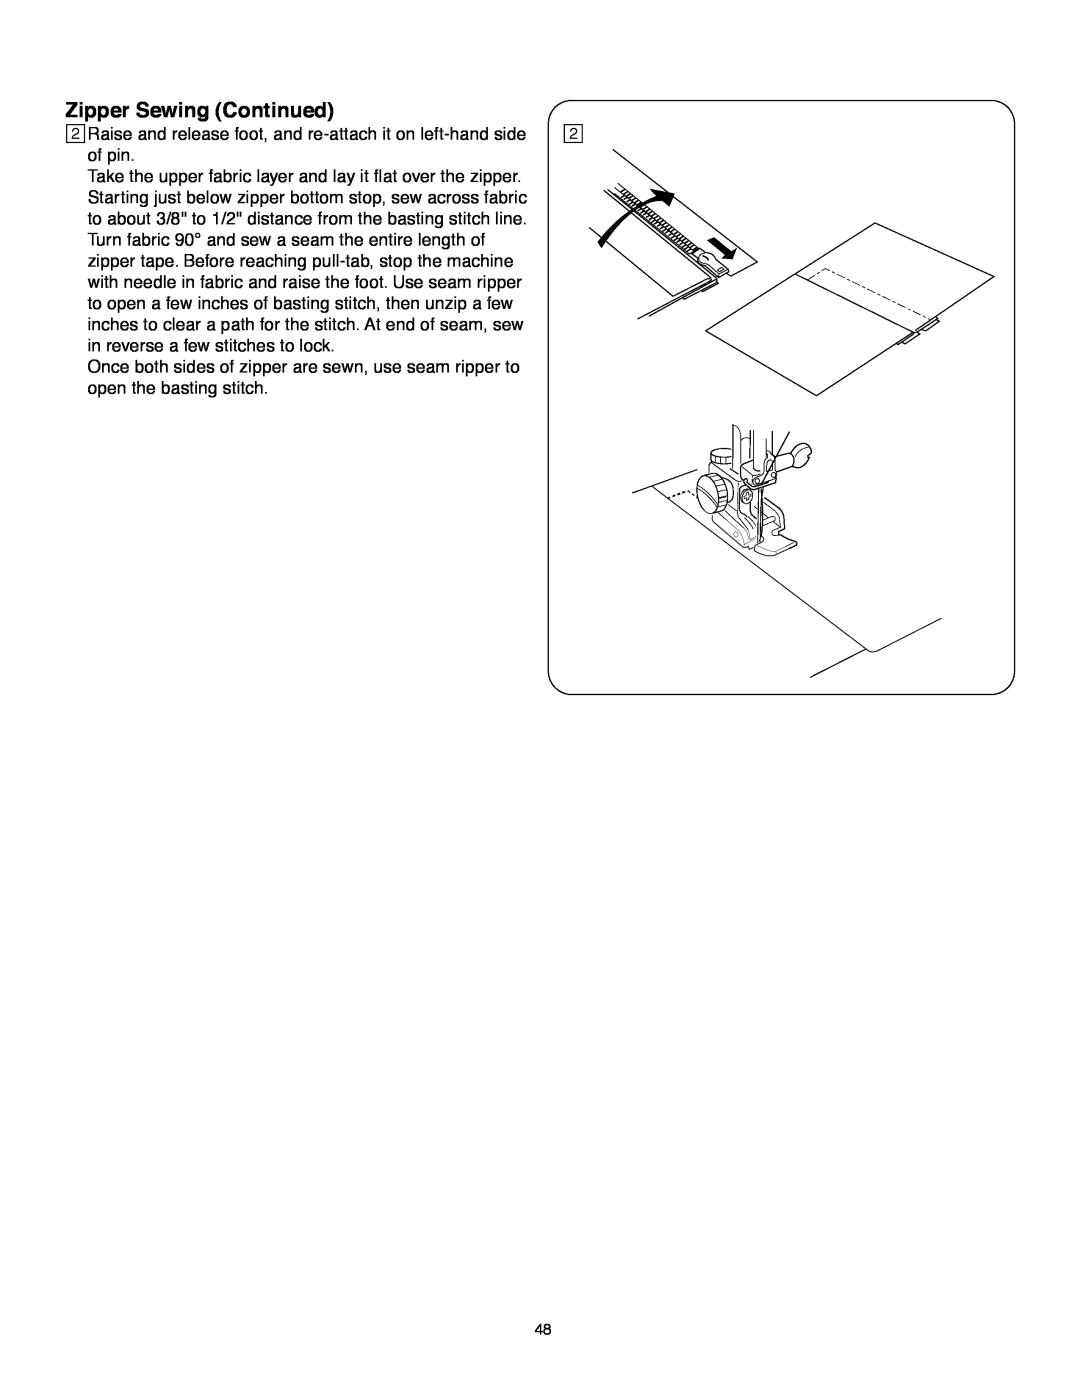 Janome MS-5027 instruction manual Zipper Sewing Continued 